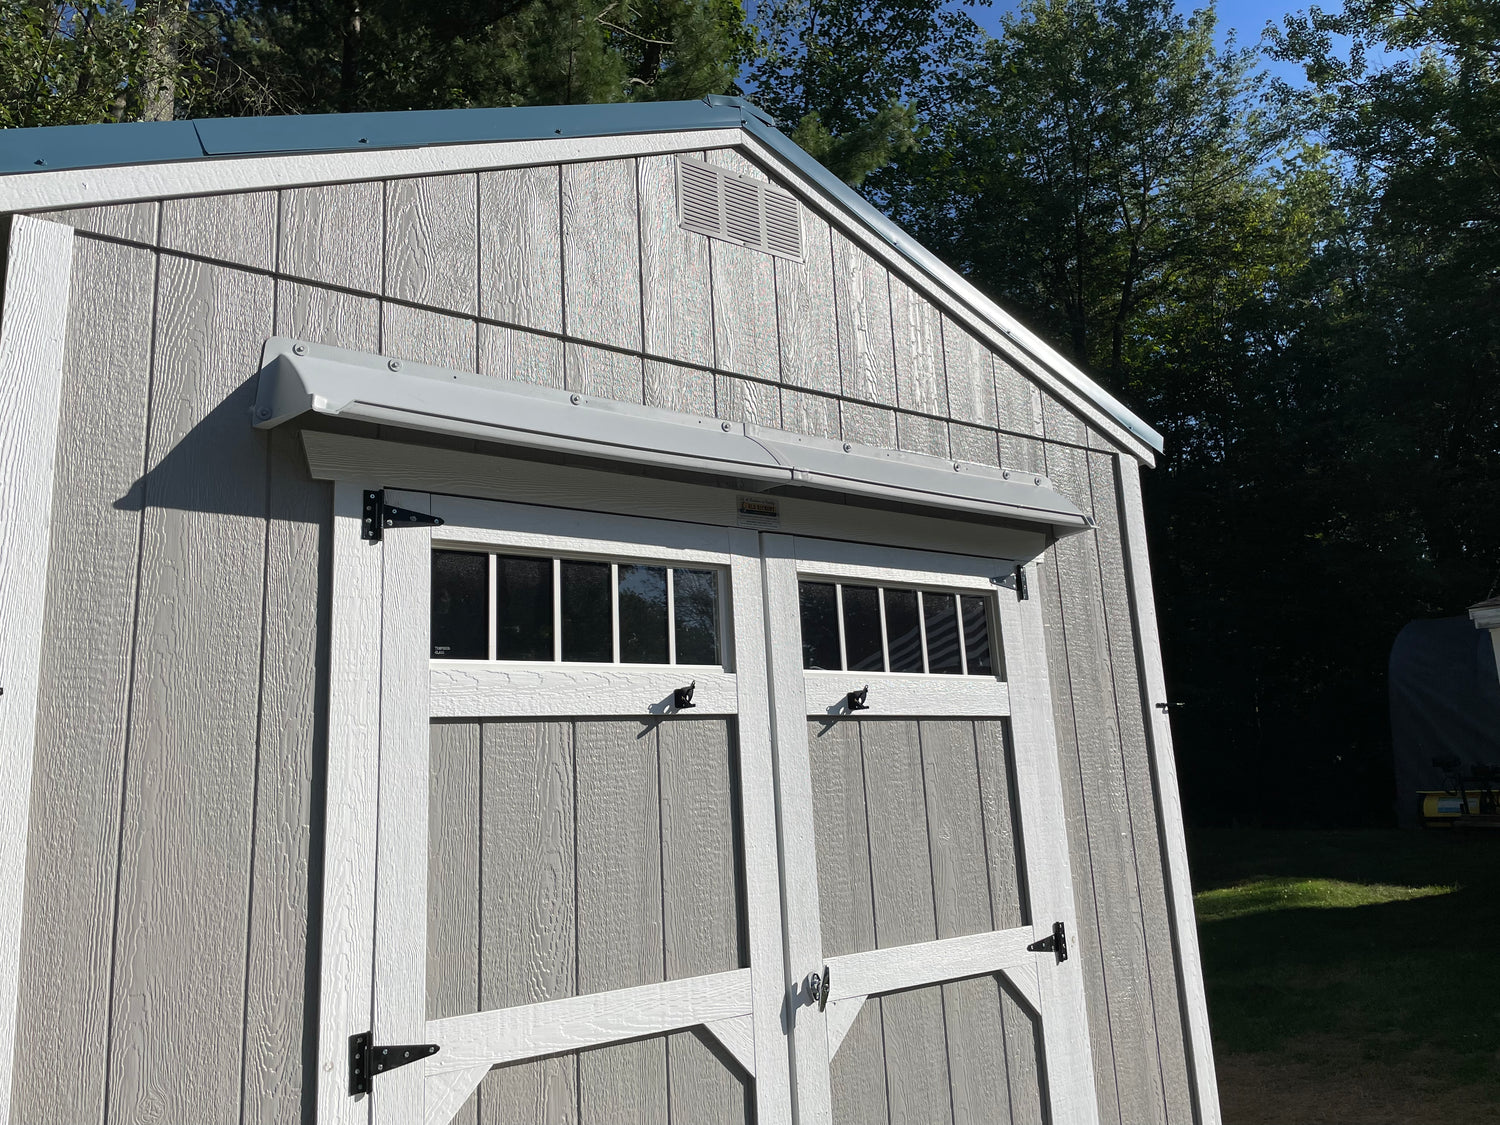 Gray and white shed with a gray rain diverter mounted above double doors.